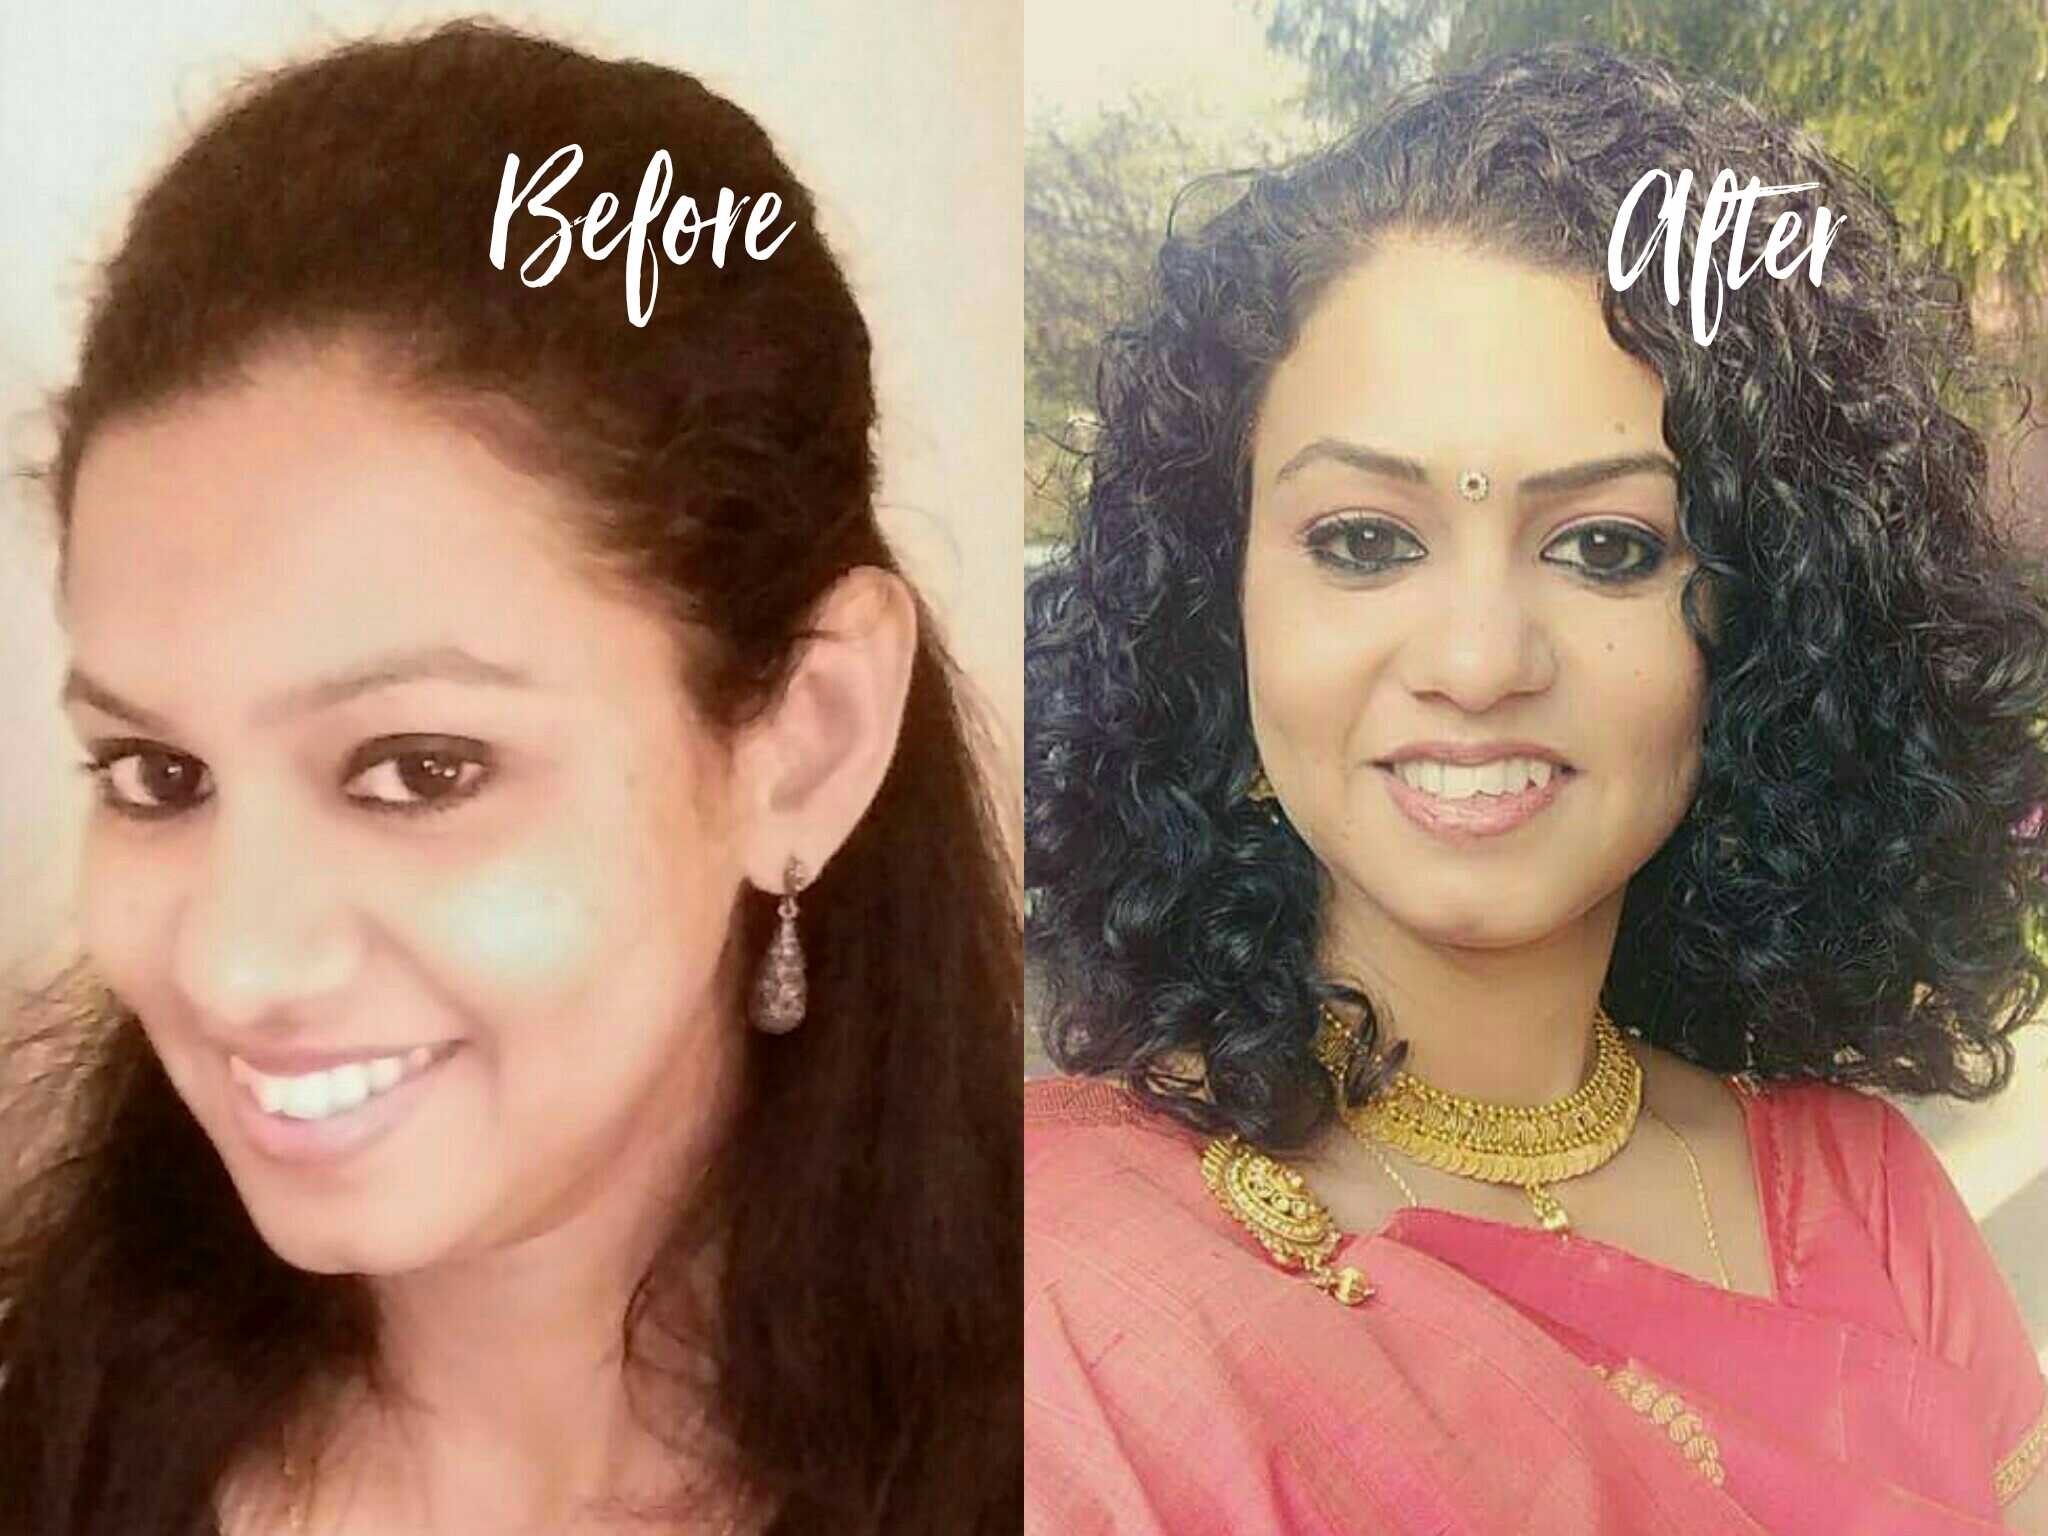 How to transition from chemically straightened hair to your natural curly  hair - CurlsandBeautyDiary